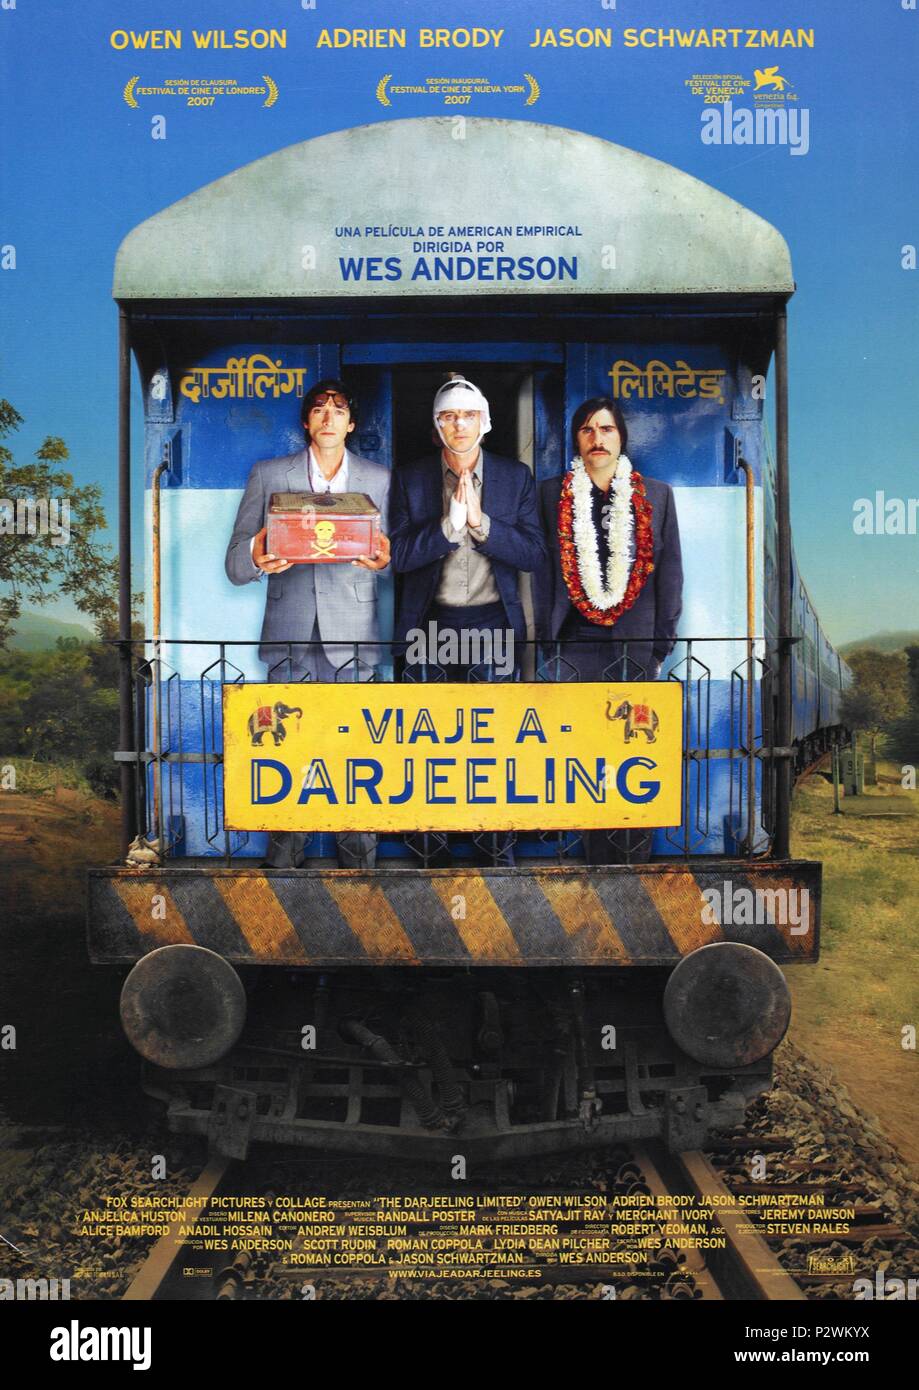 The Darjeeling Limited: Who needs a film set in LA when you have a